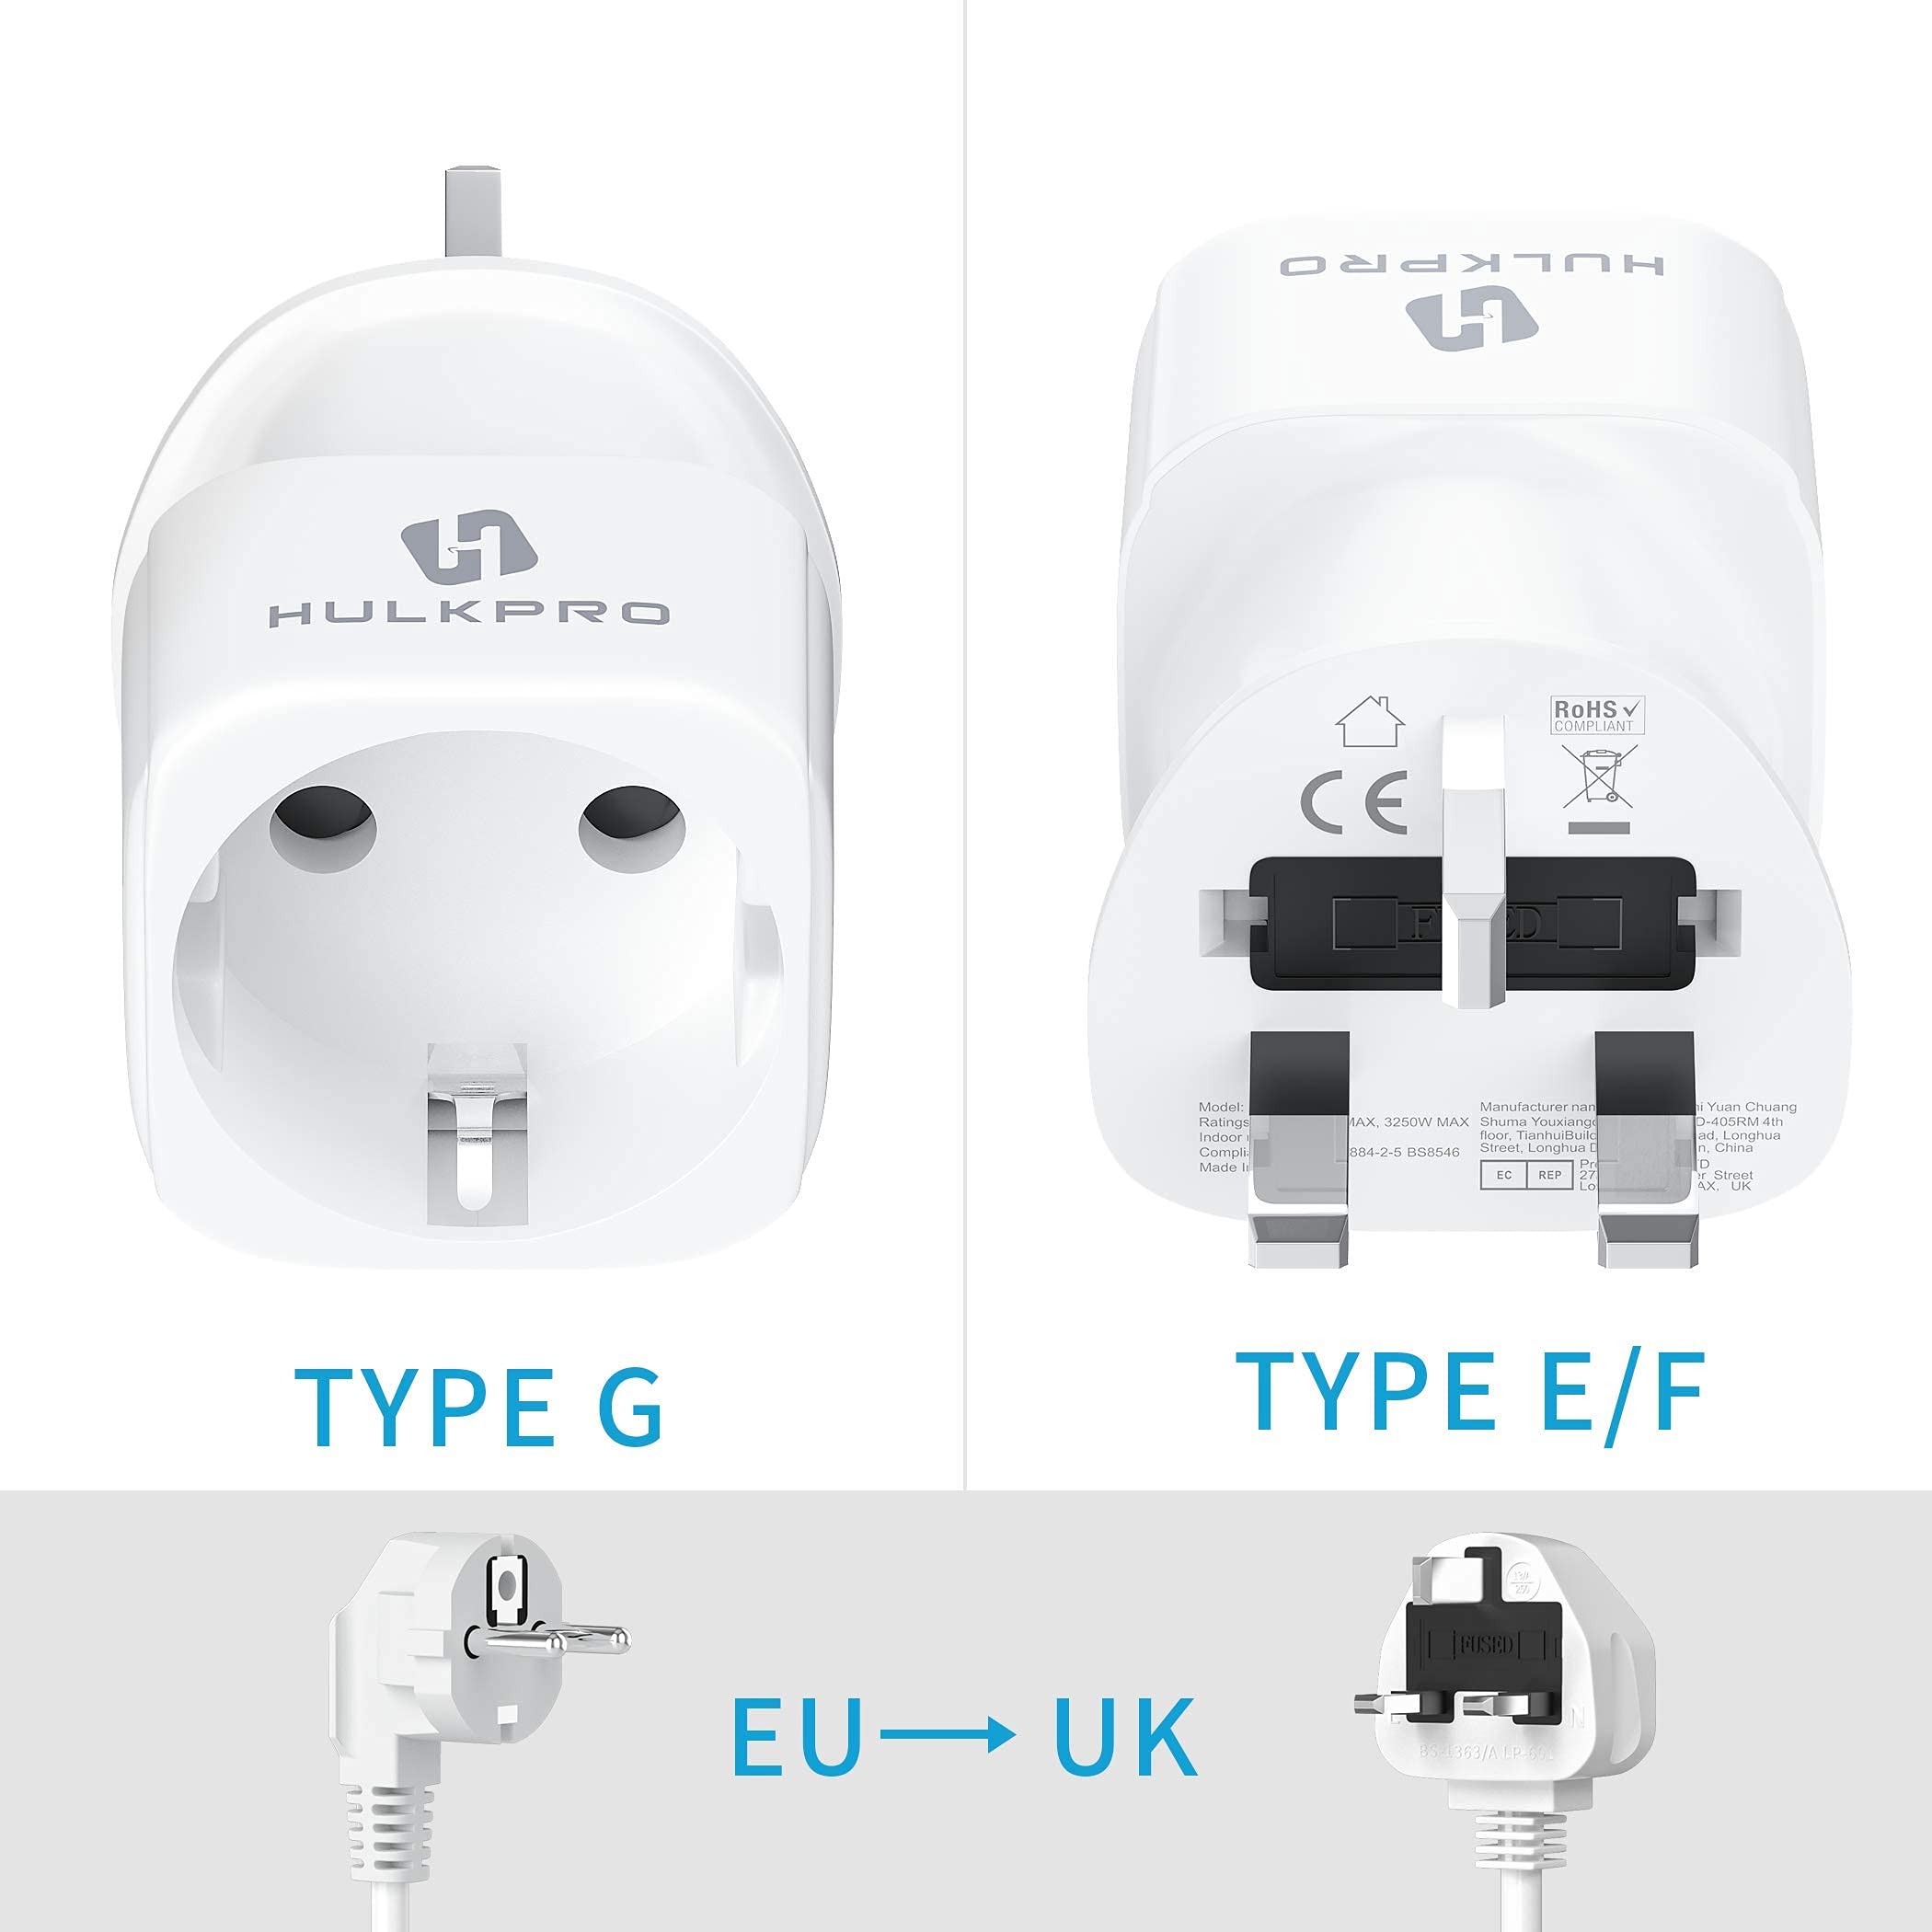 2 Pack Hulkpro European to UK Adapter, 13amp fuse 3250W, Plug Adaptor EU to UK Plug Adapter 2 Pin to 3 Pin for Travel for Shaver Toothbrush Hairdryer From France, Italy, Spain, Germany Euro to UK